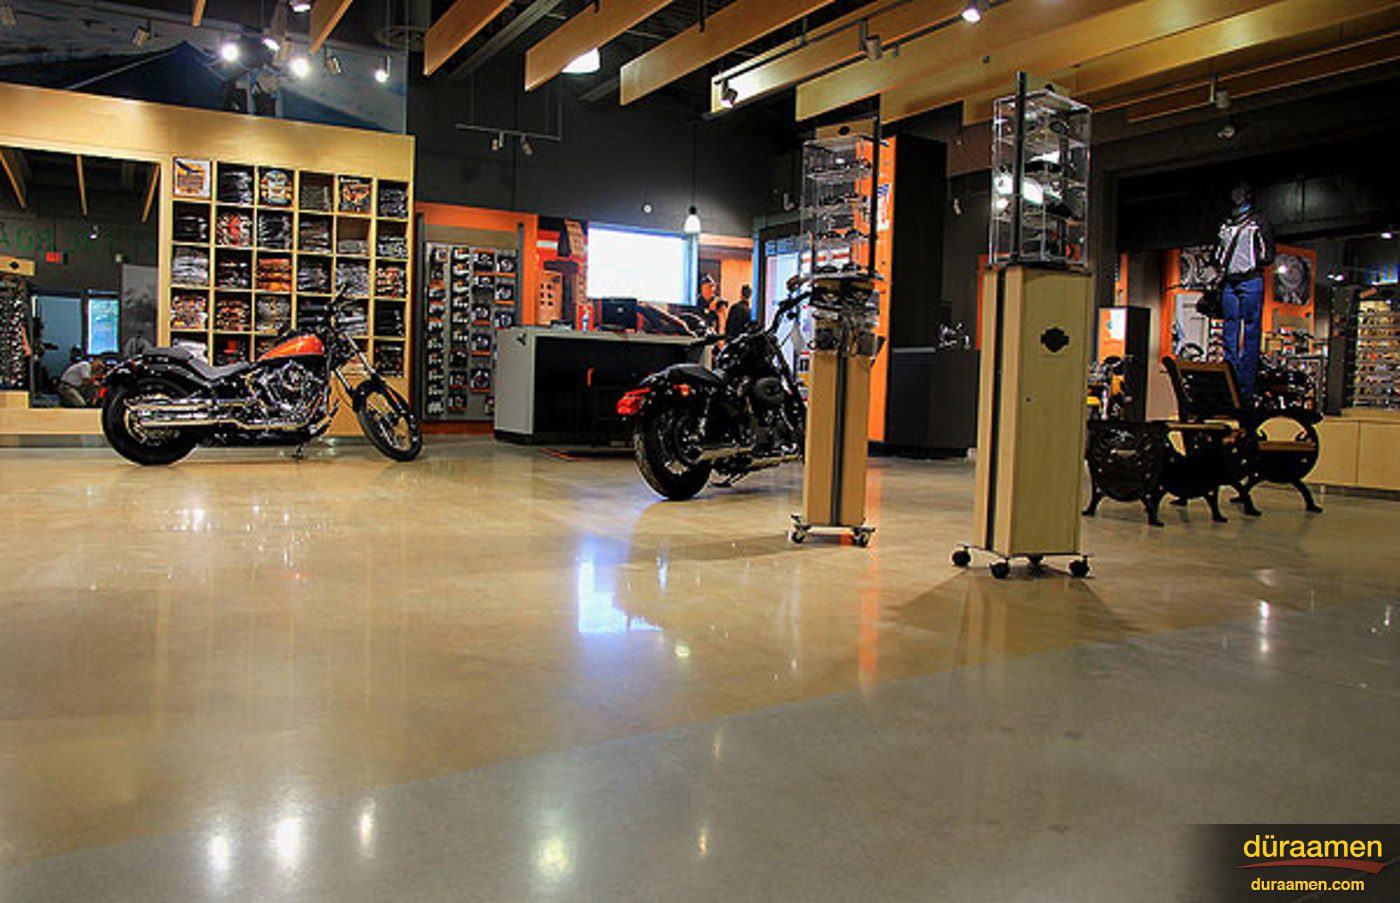 The chrome of a Harley Davidson motorcycle reflects nicely off the polished concrete floor Harley Davidson Showroom | Duraamen Engineered Products Inc